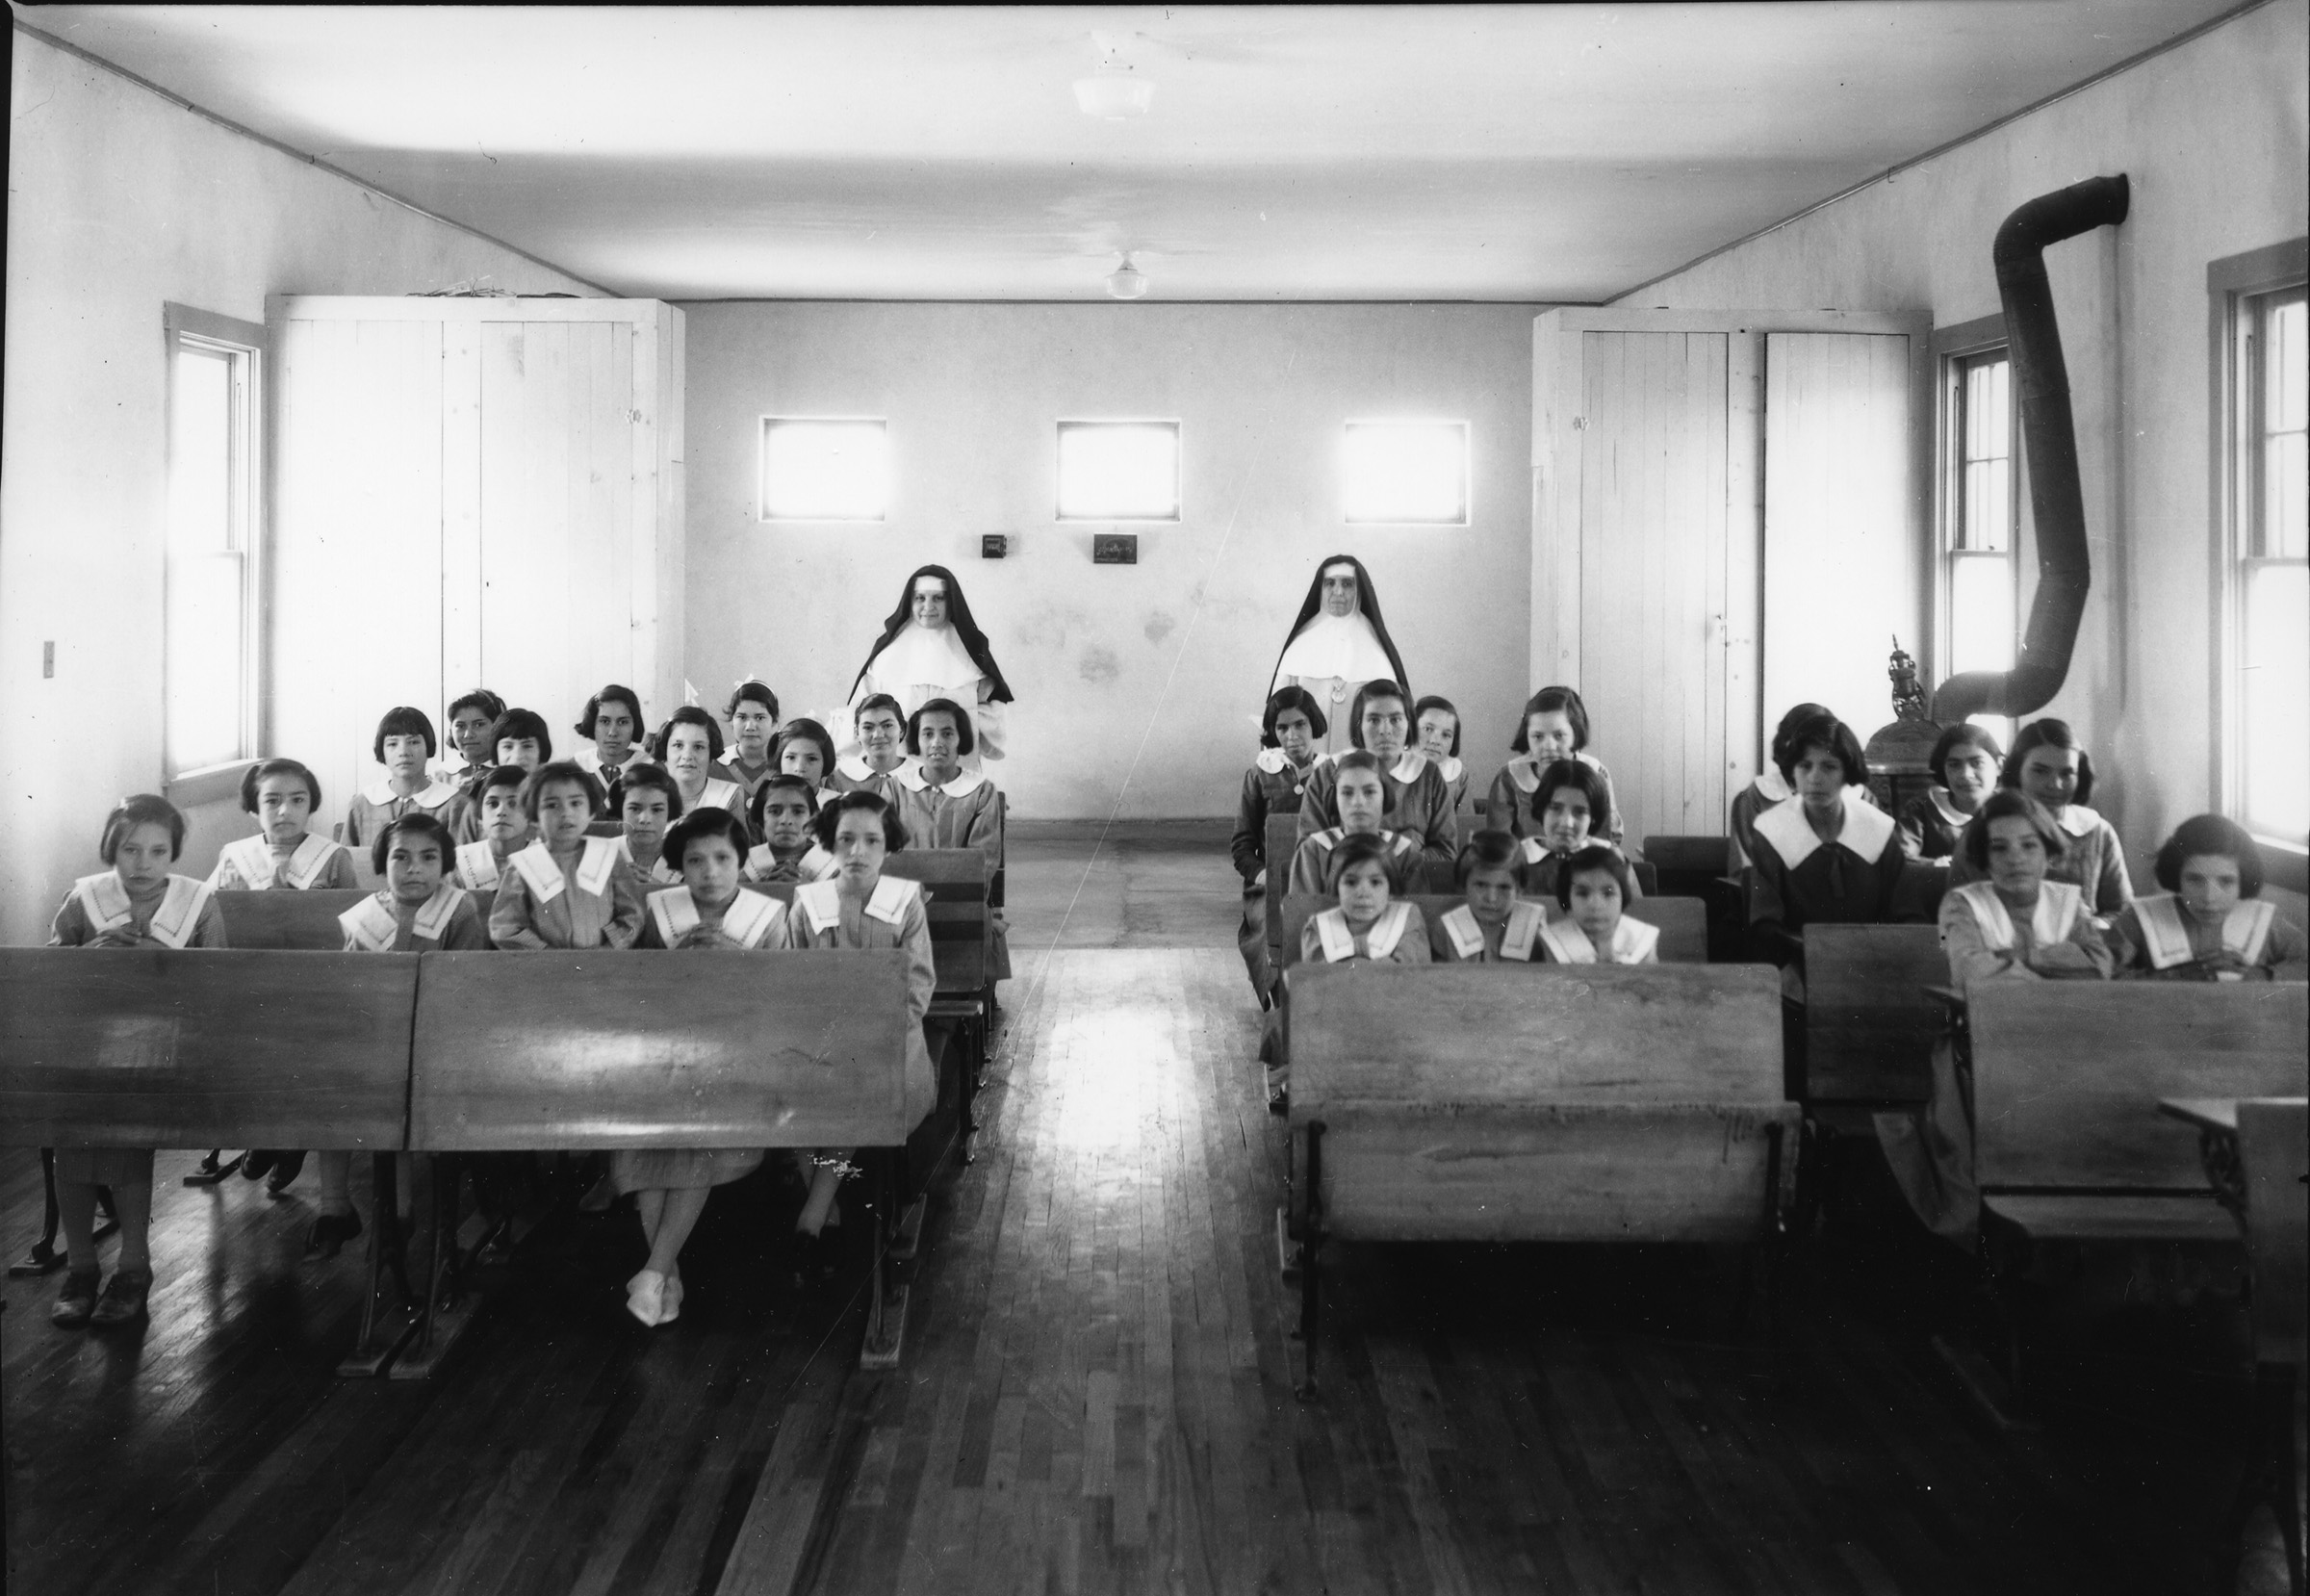 interior view of a classroom with students and nuns